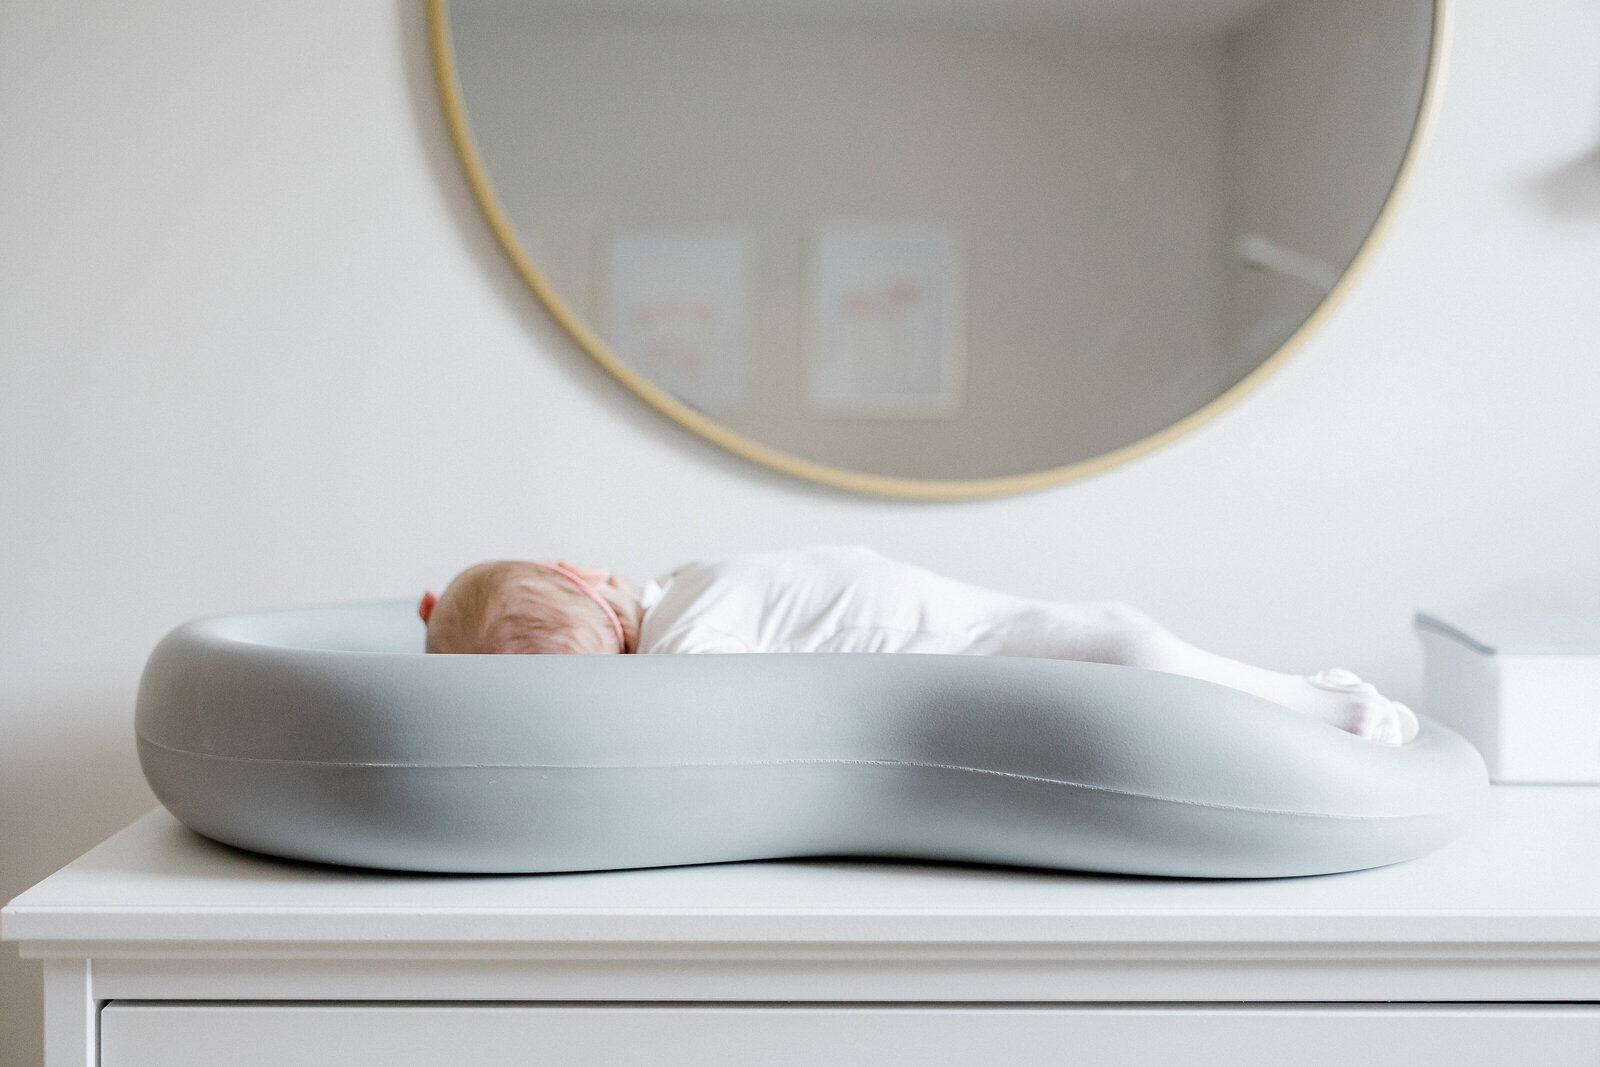 photo of baby laying on changing table